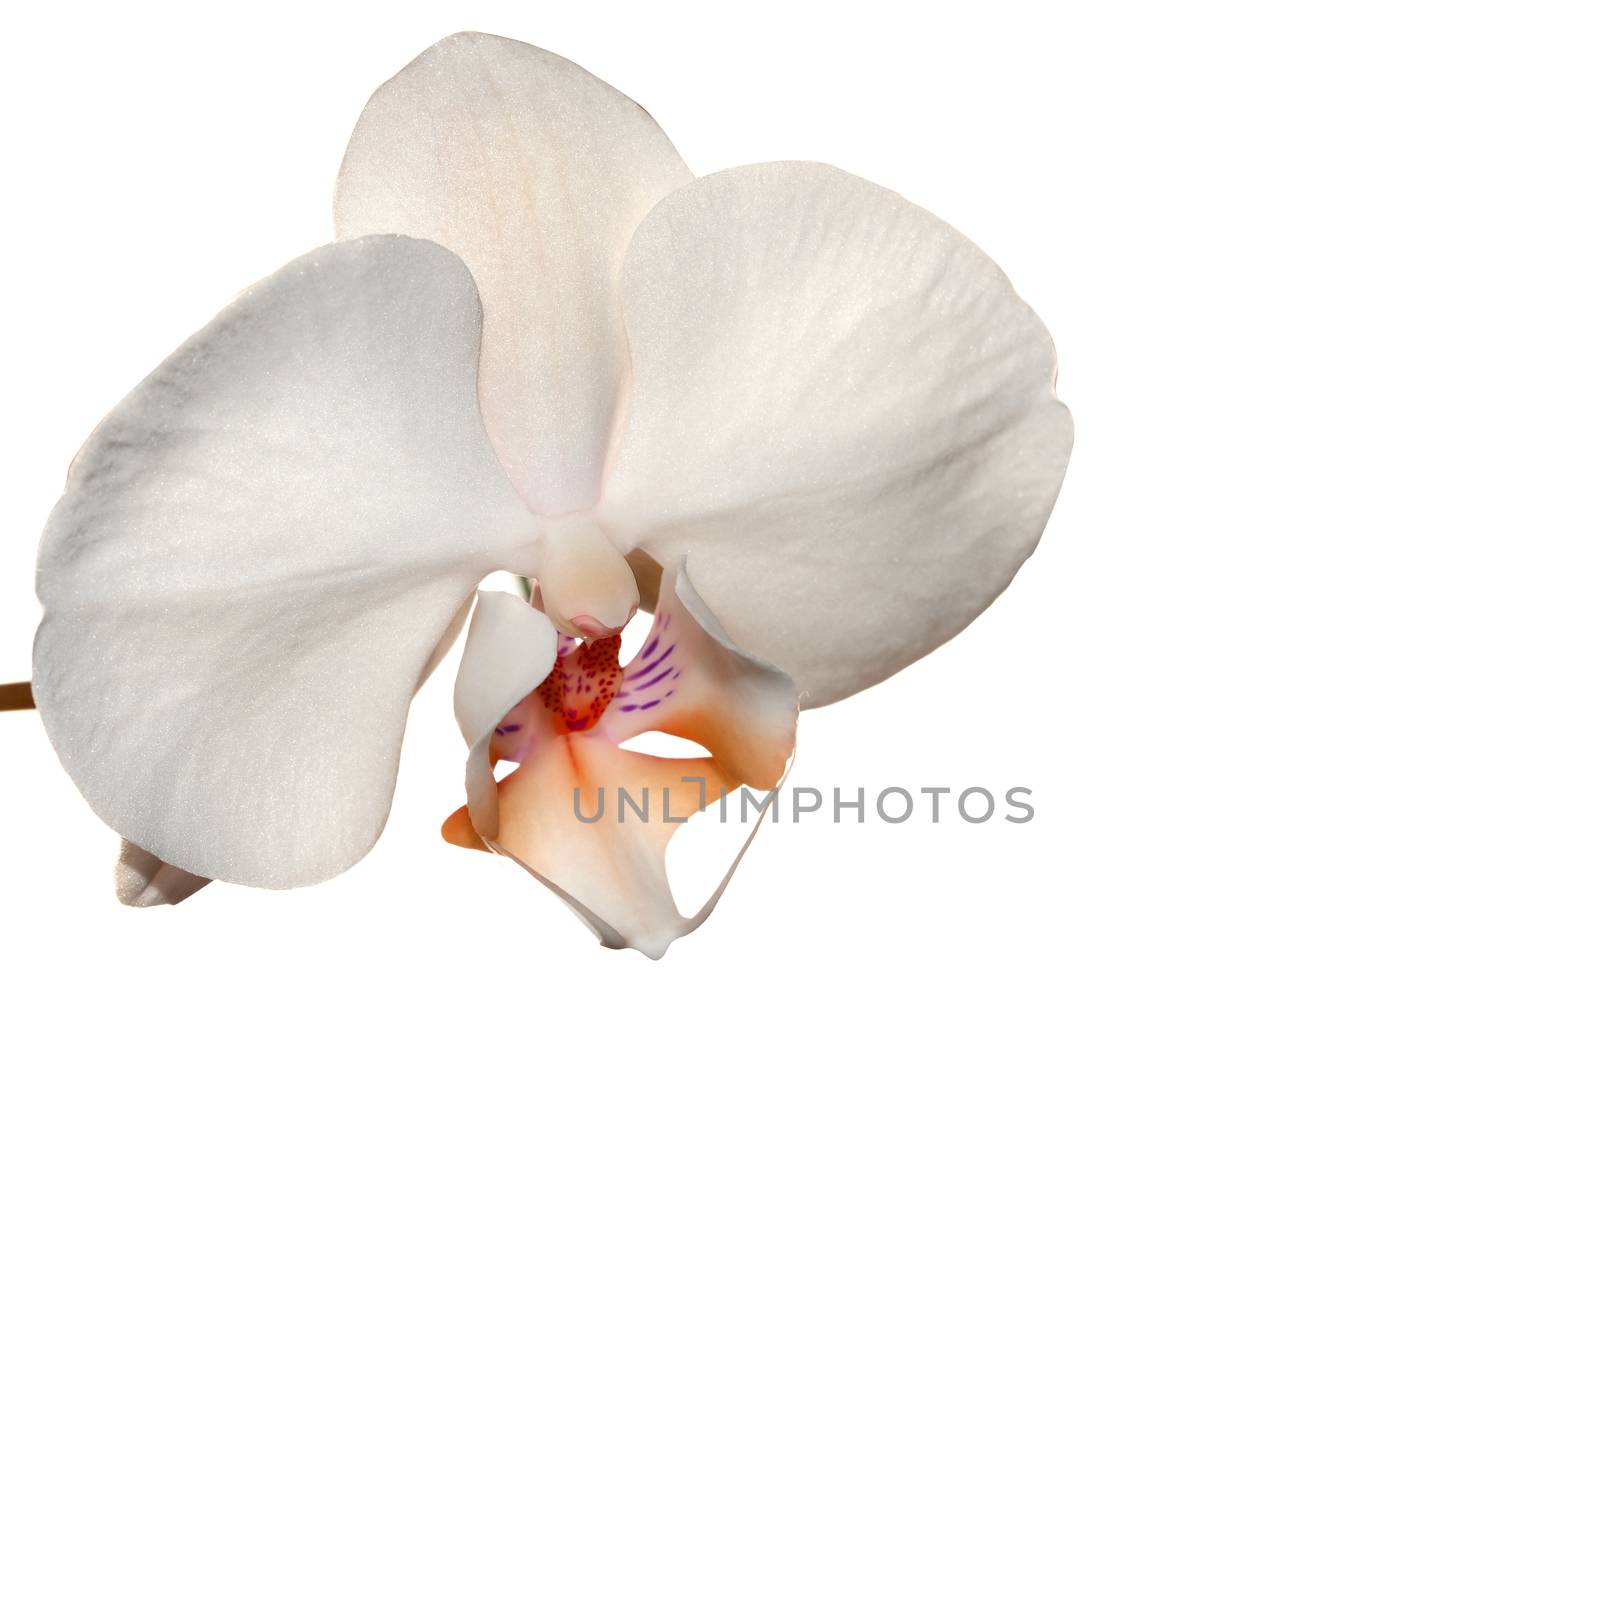 Beautiful orchid flower background with space for your text